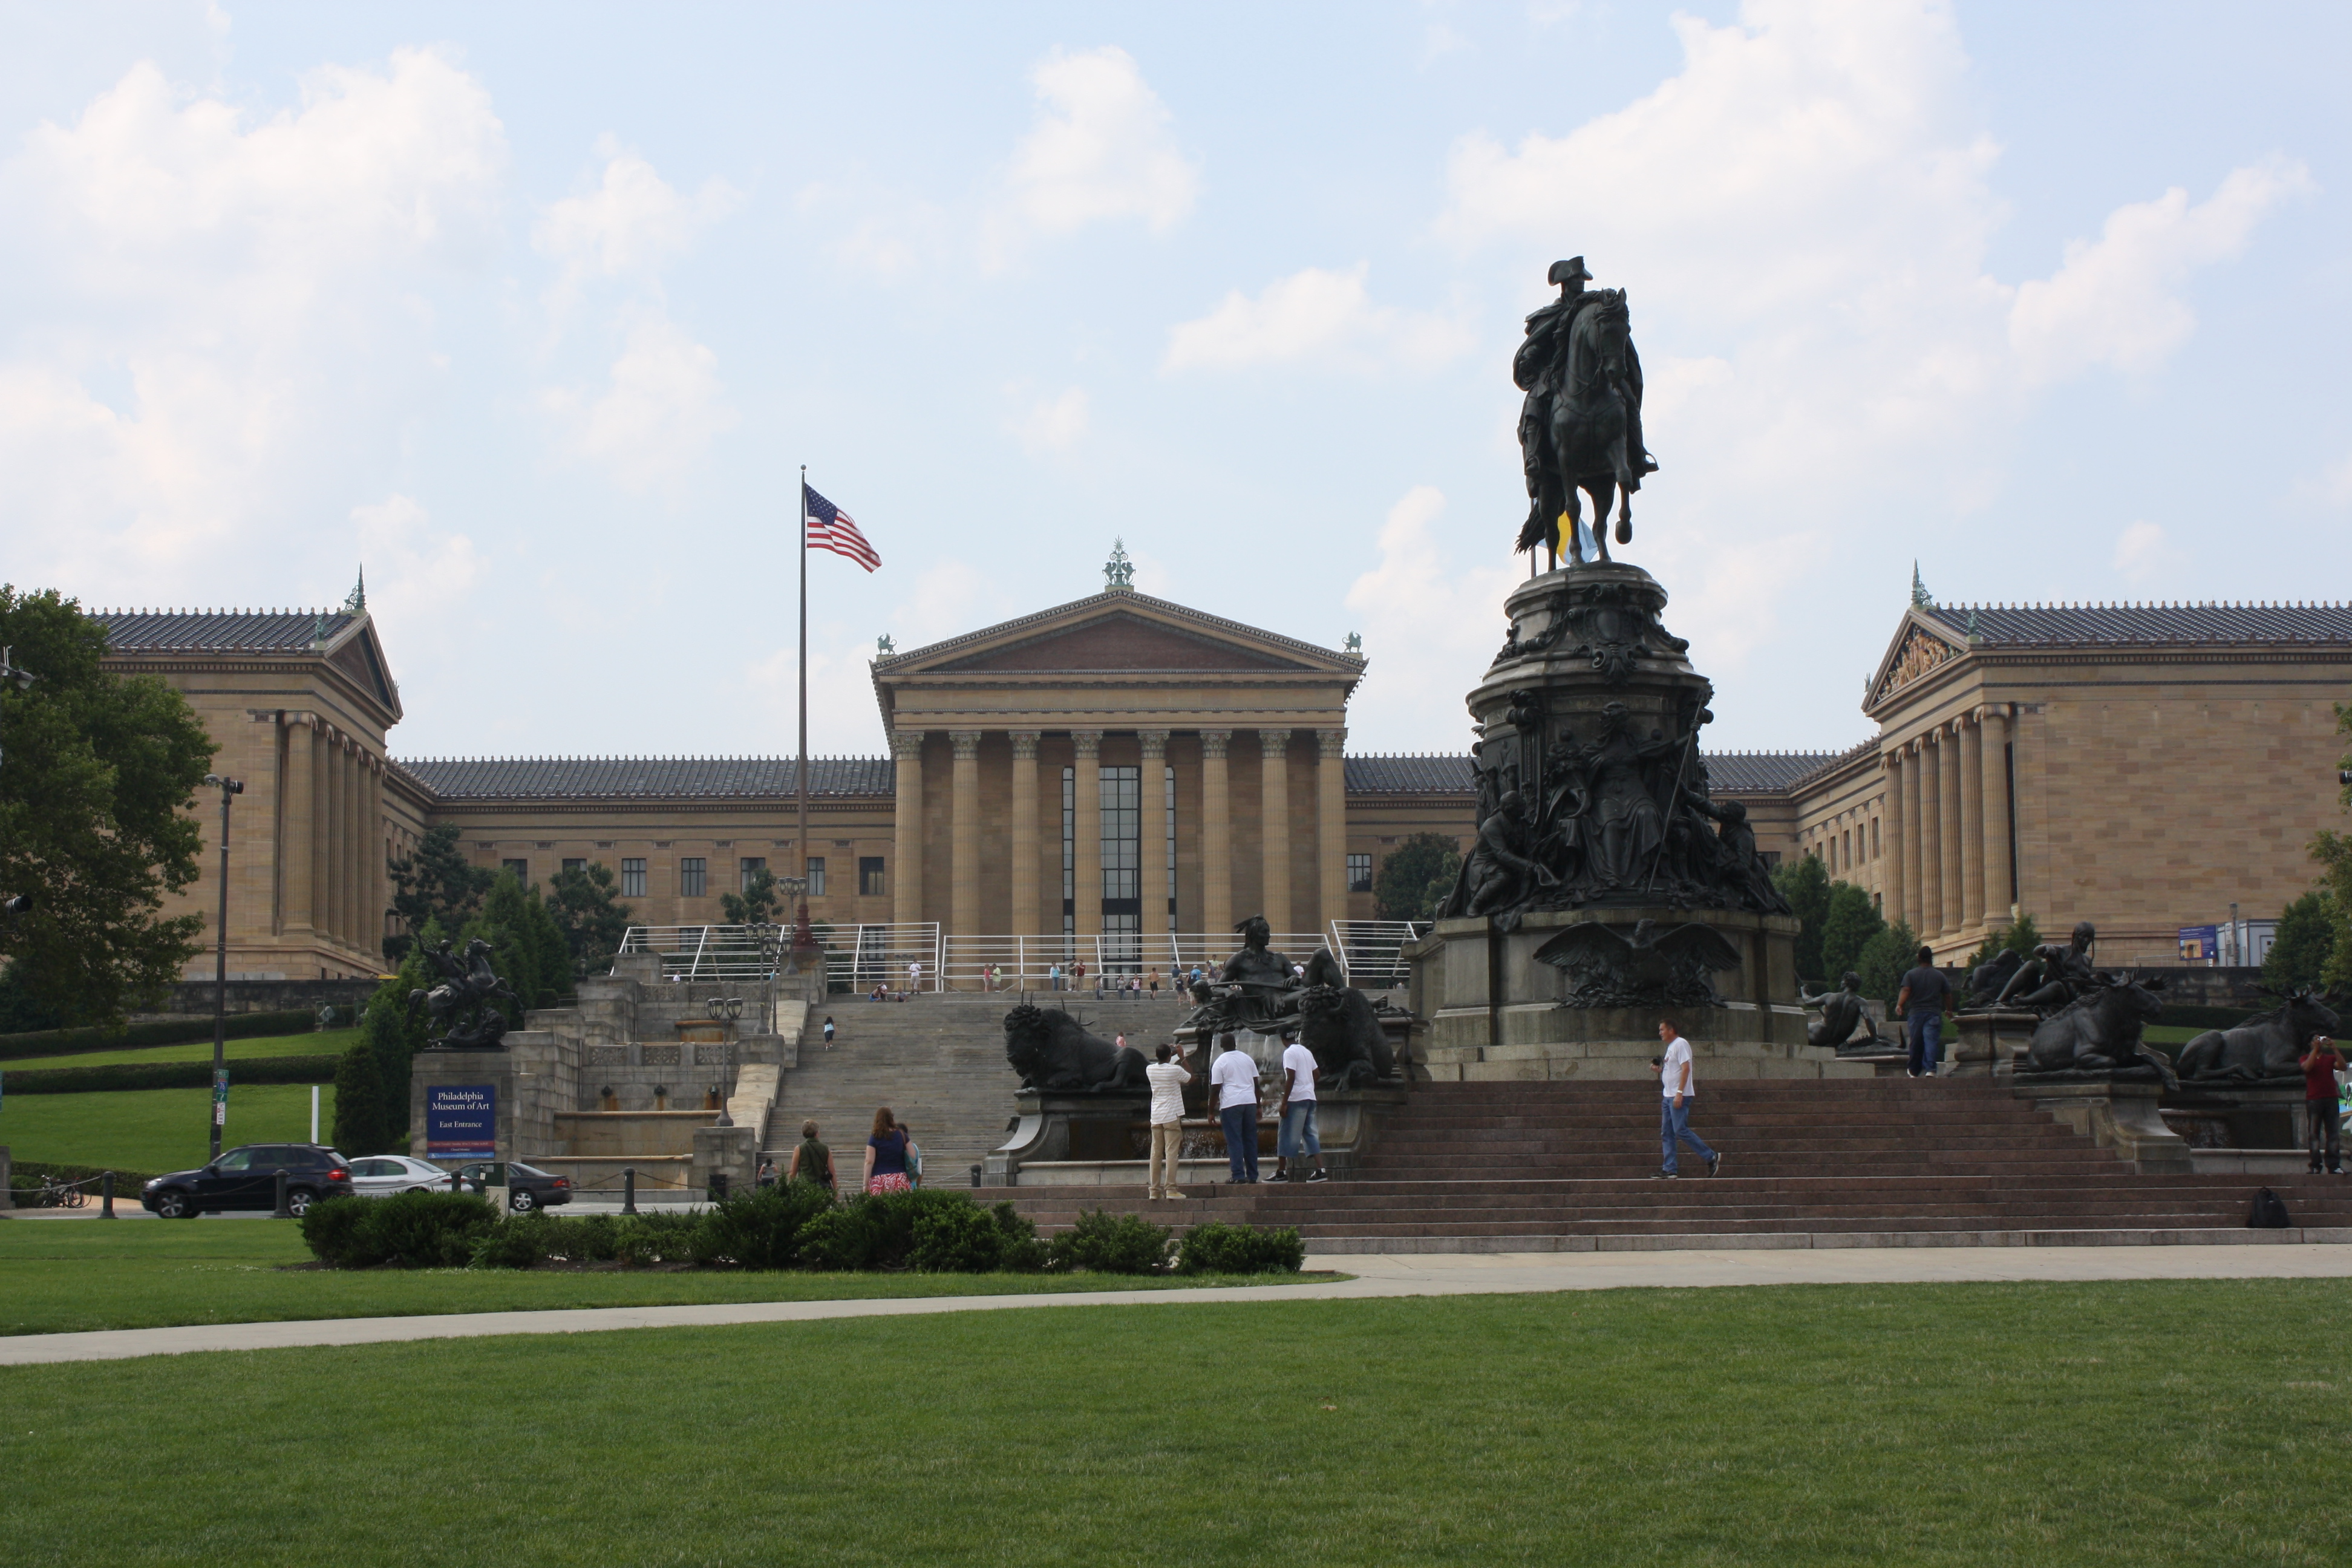 The Washington Monument in front of the Philadelphia Museum of Art